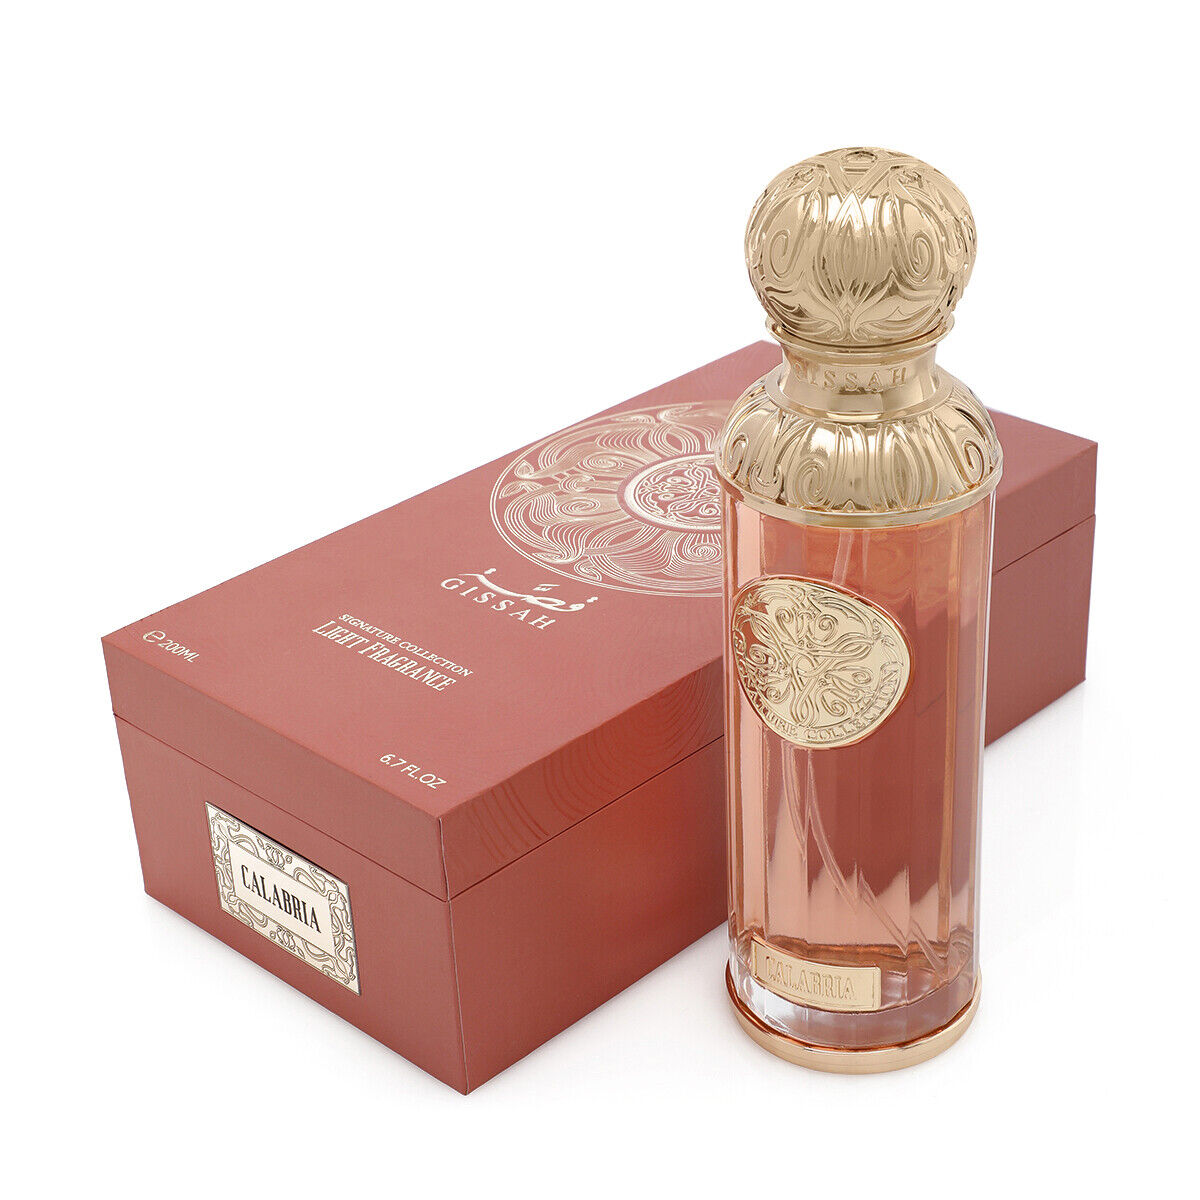 The image shows a perfume bottle named "Calabria" from the Gissah Signature Collection. The bottle is tall and cylindrical with a clear glass body that has a slight rose tint, and it is adorned with a gold ornate medallion that features intricate designs. The cap is a luxurious gold color with a decorative embossed pattern. Beside the bottle is the packaging, a box in a matching rose tint with a gold mandala design and the names "Gissah" and "Calabria" printed on it.